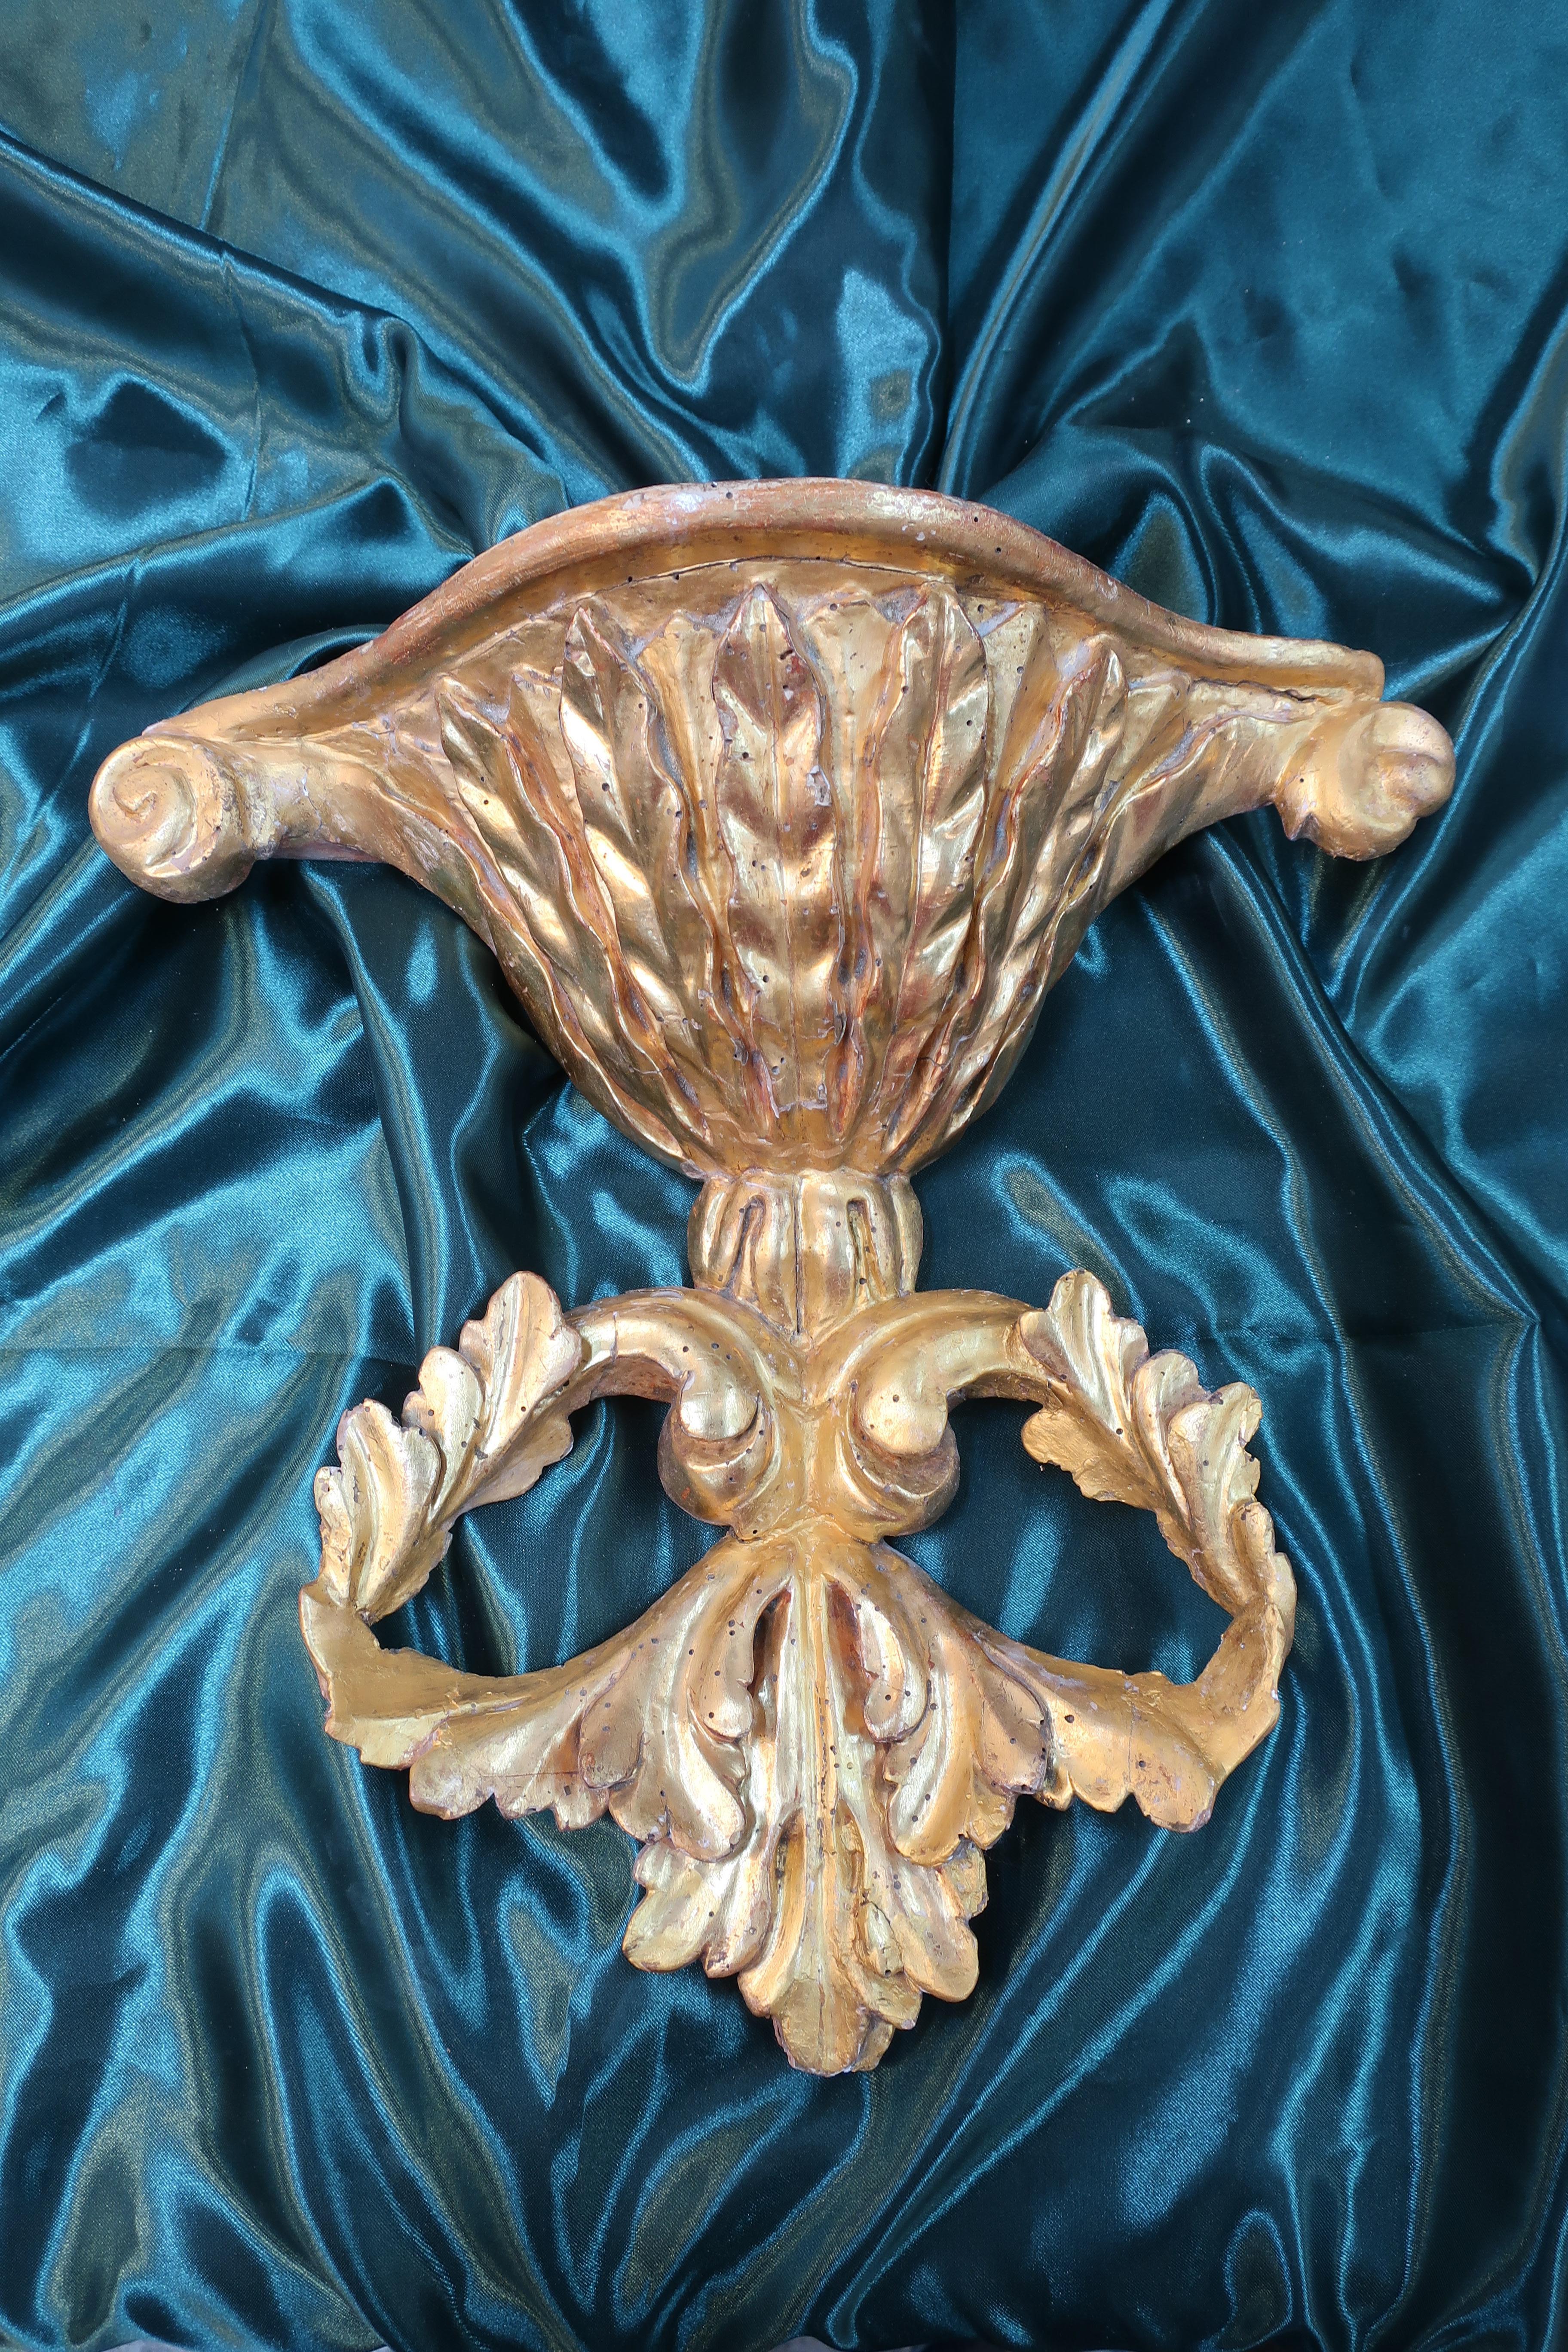 This neoclassical wooden piece was originally hand carved and just recently restored.
The top is of a stunning antique yellow, characteristic of the neoclassical age.
This was a period following the lavish and luxurious decorative aesthetics of